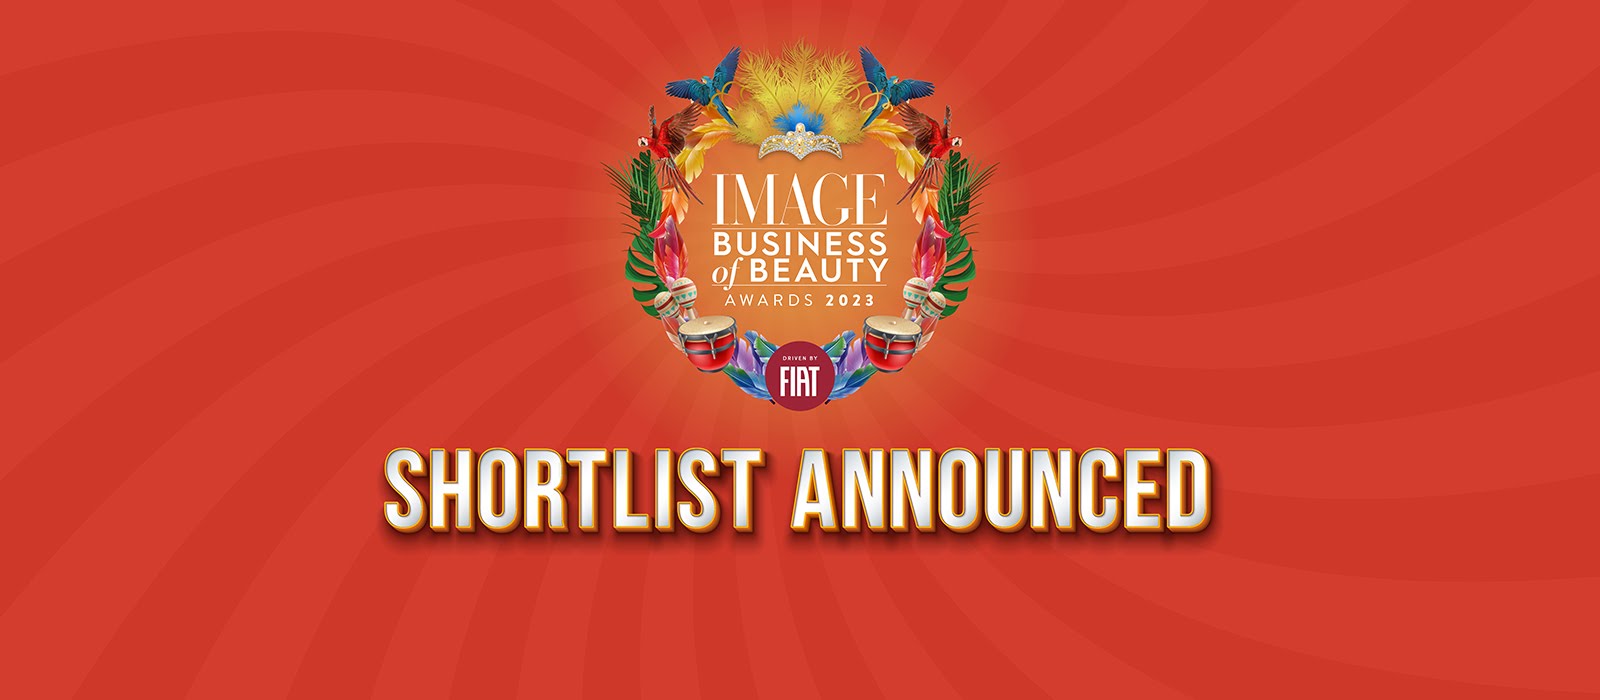 The IMAGE Business of Beauty Awards 2023 Shortlist